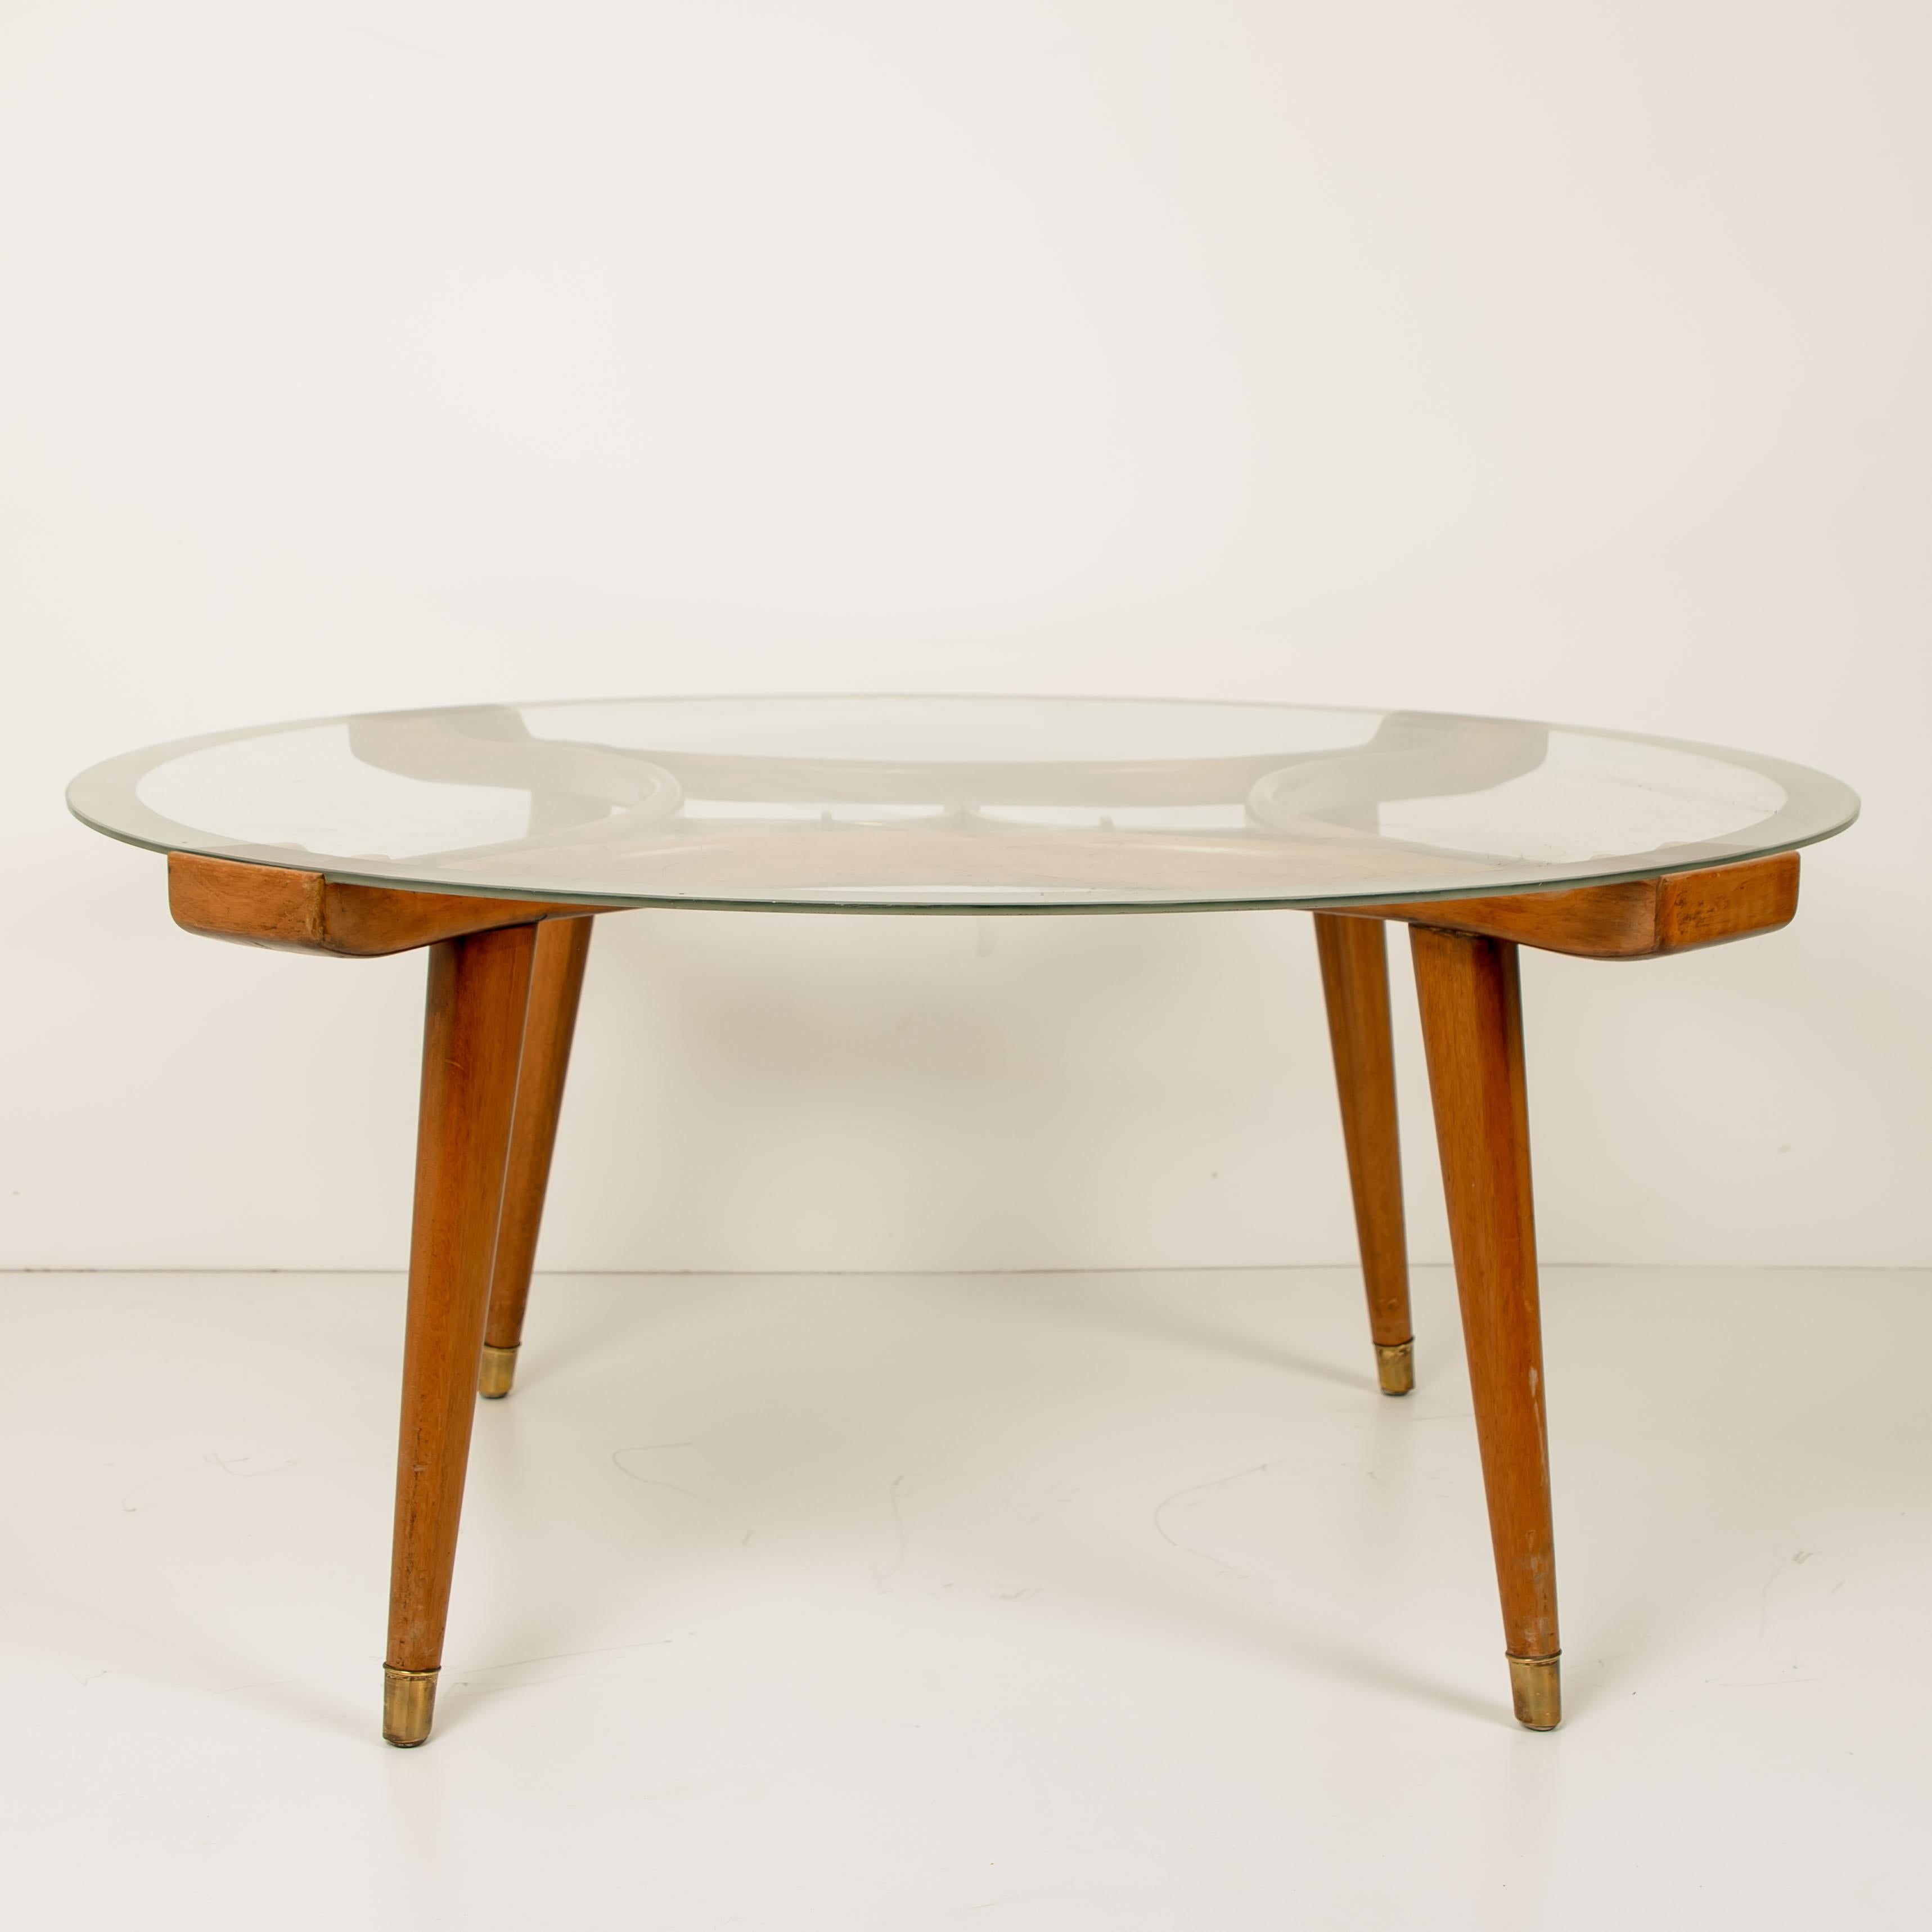 Solid Brass Walnut Glass Table, by William Watting, Produced by Fristho, 1950s For Sale 1